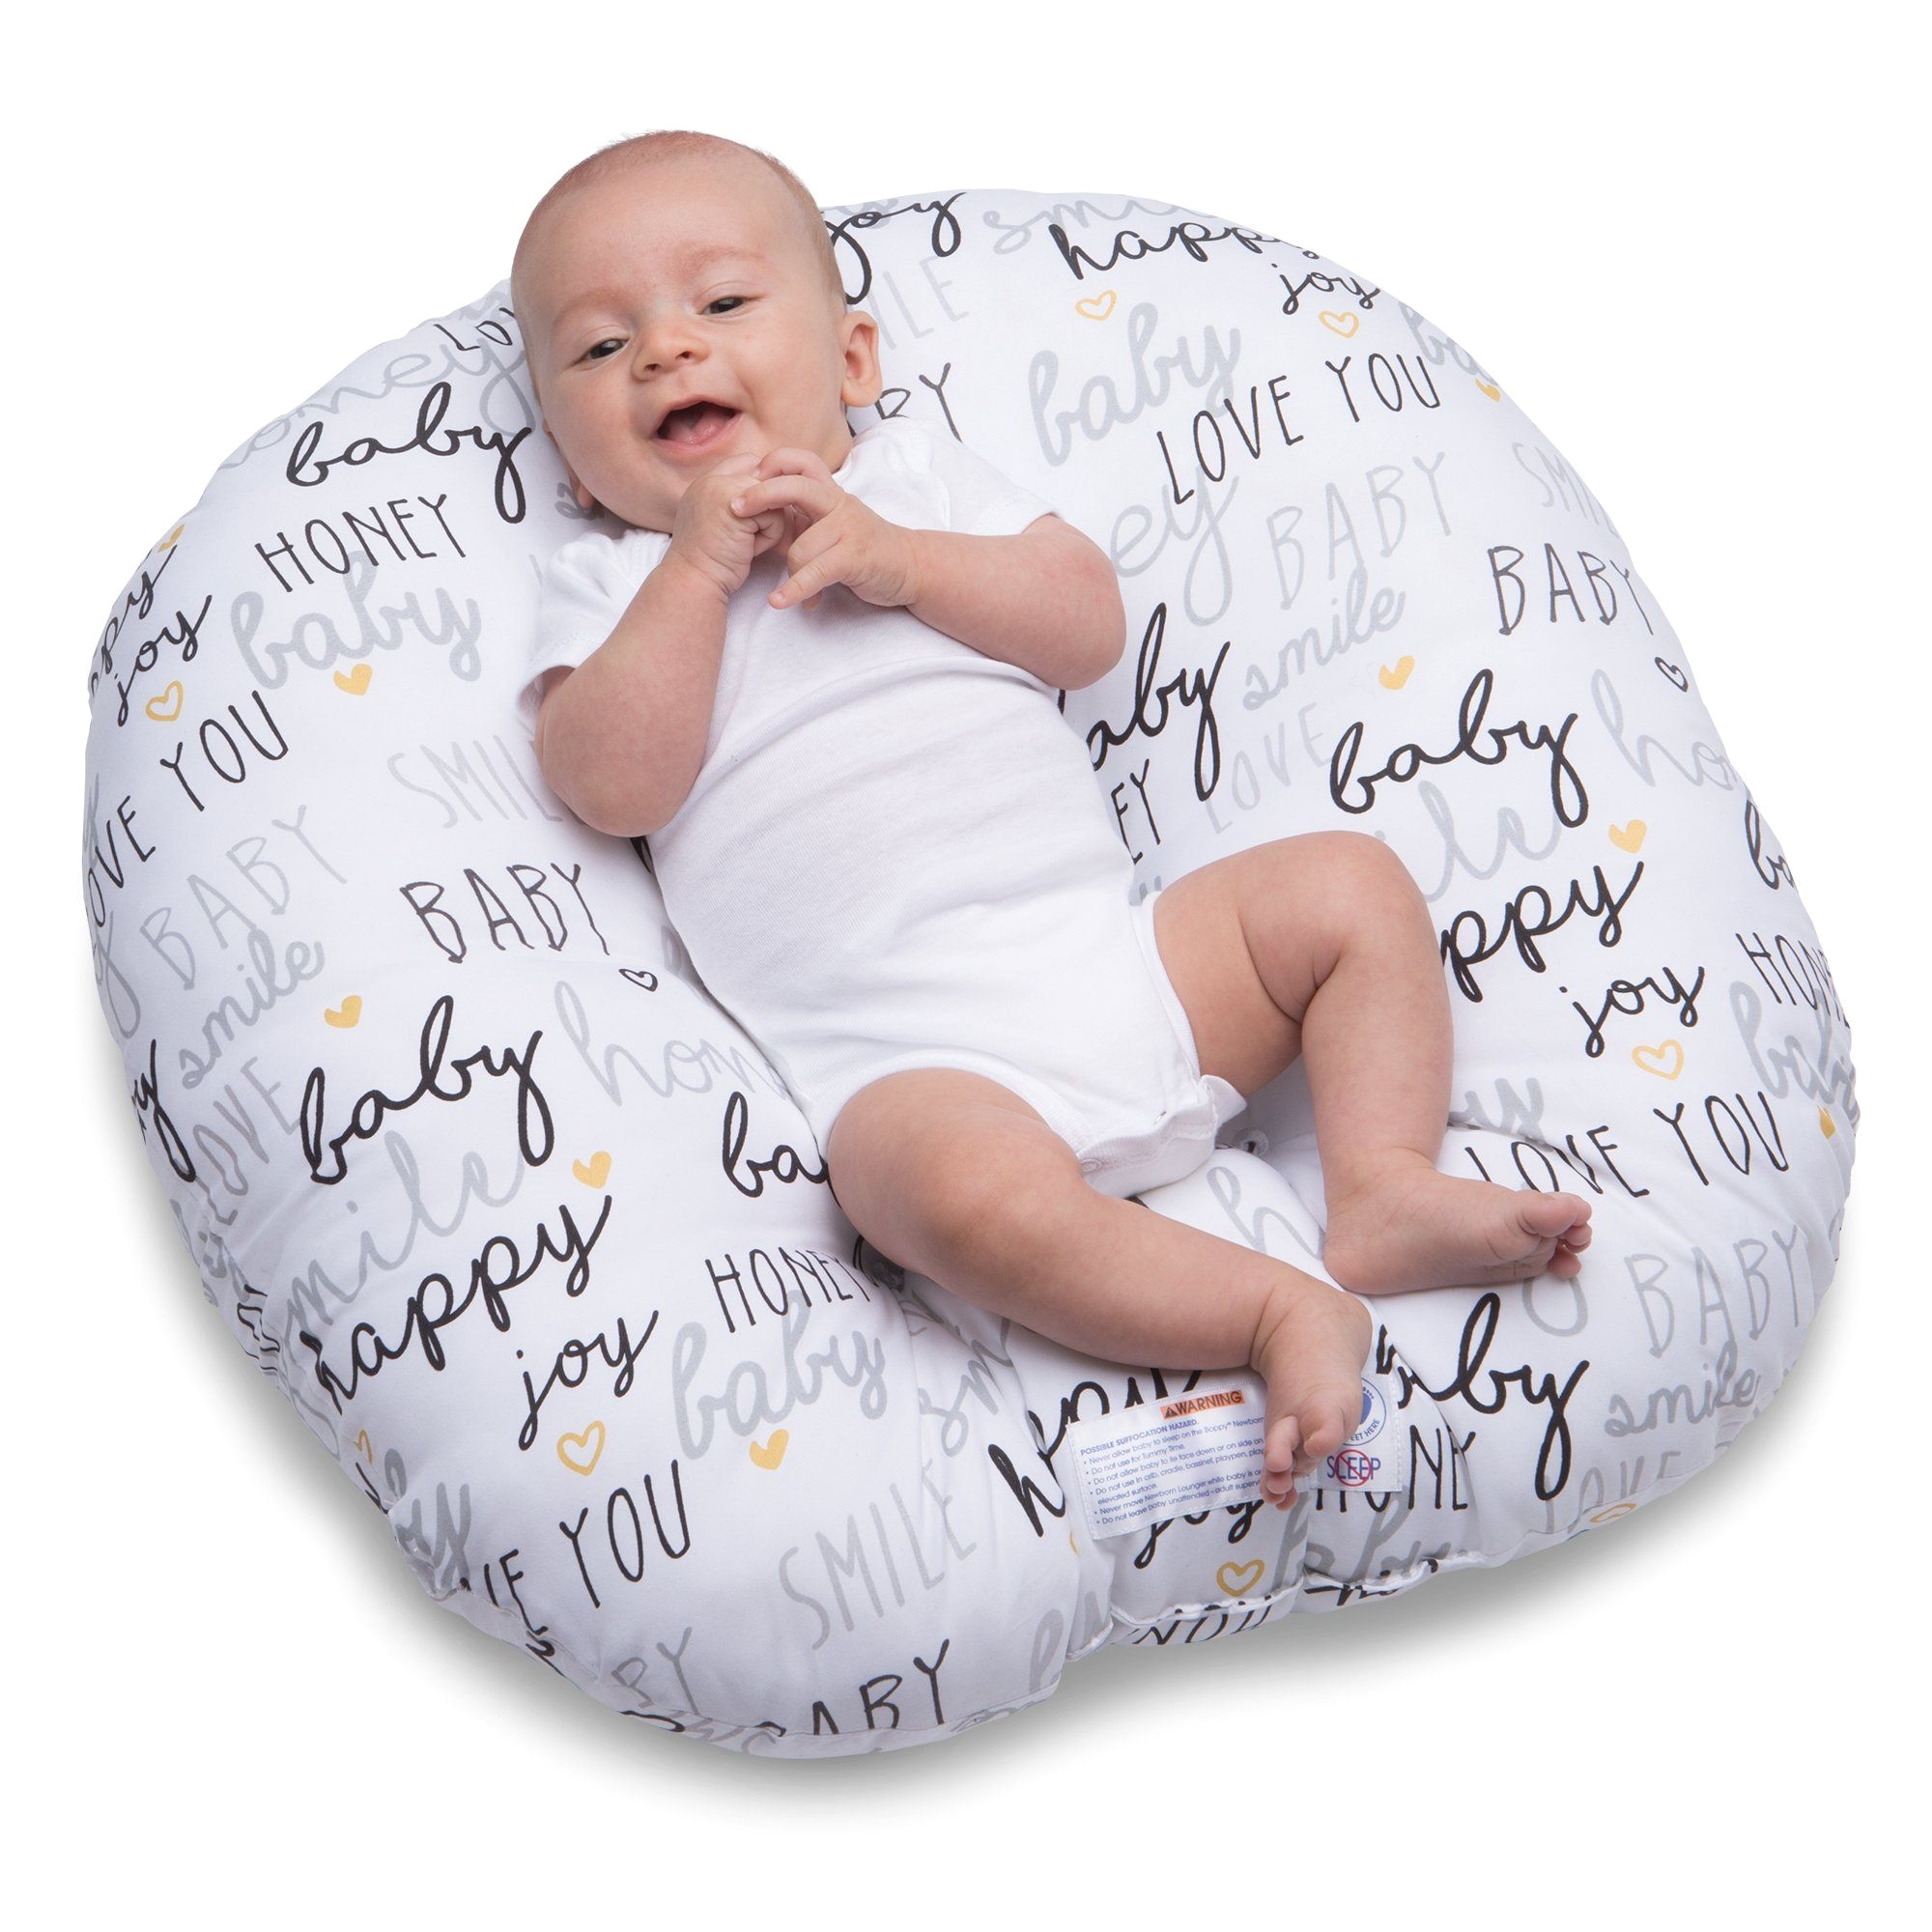 Boppy Baby Chair Boppy Newborn Hello Baby Lounger Black and Gold Baby Product